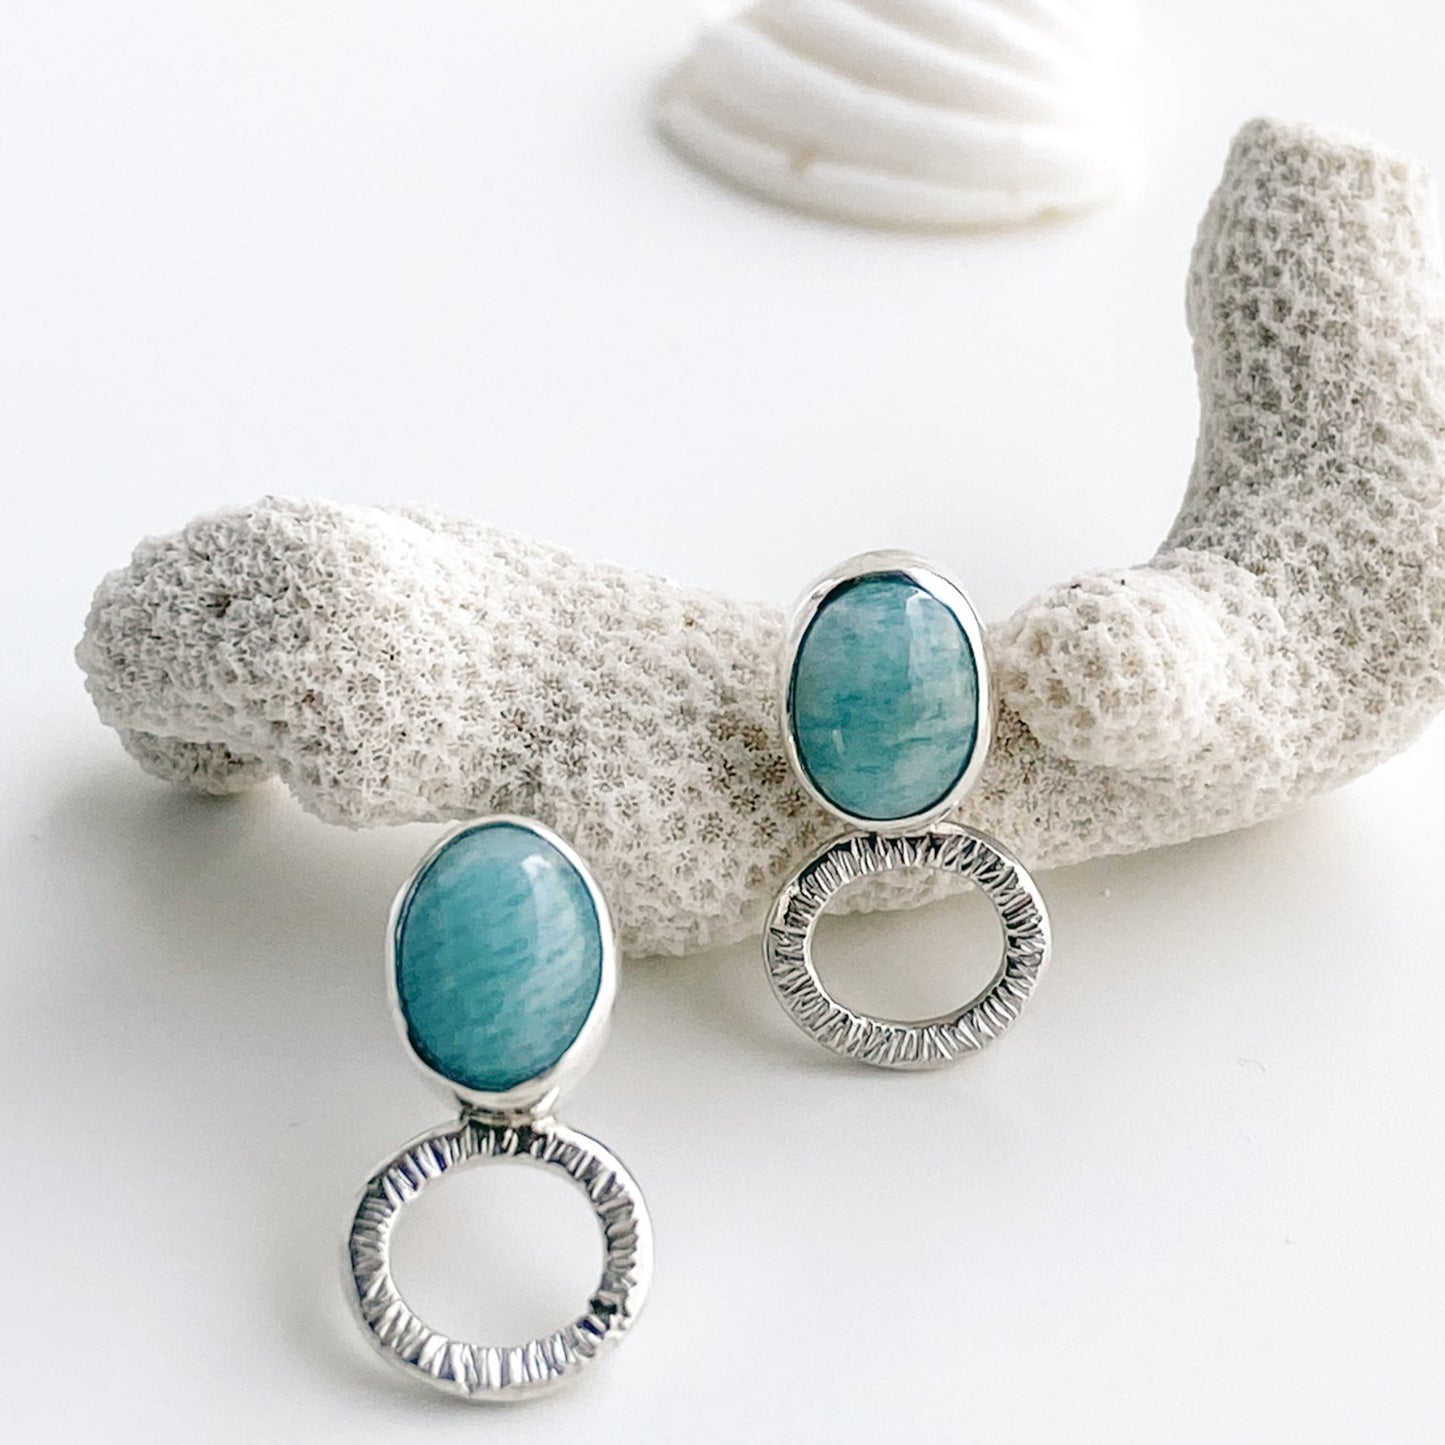 Closeup view of ocean blue amazonite stud earrings displayed with white coral and a white sea shell